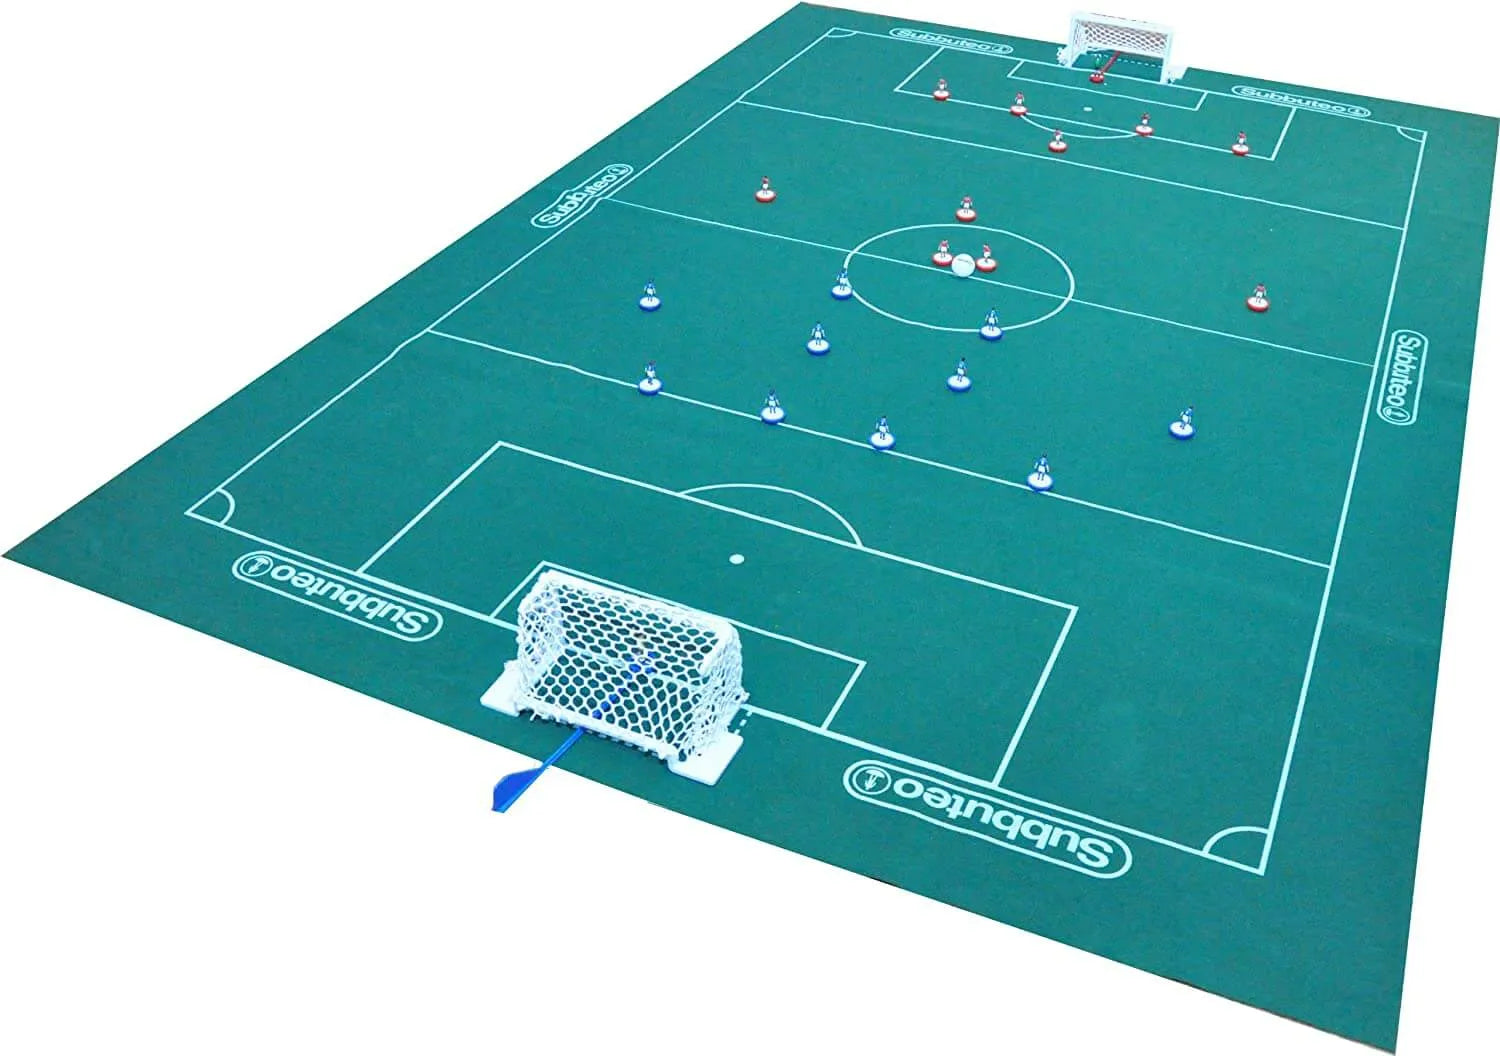 Sports games for kids - Shop subbuteo at The Toy Room - football board games for kids